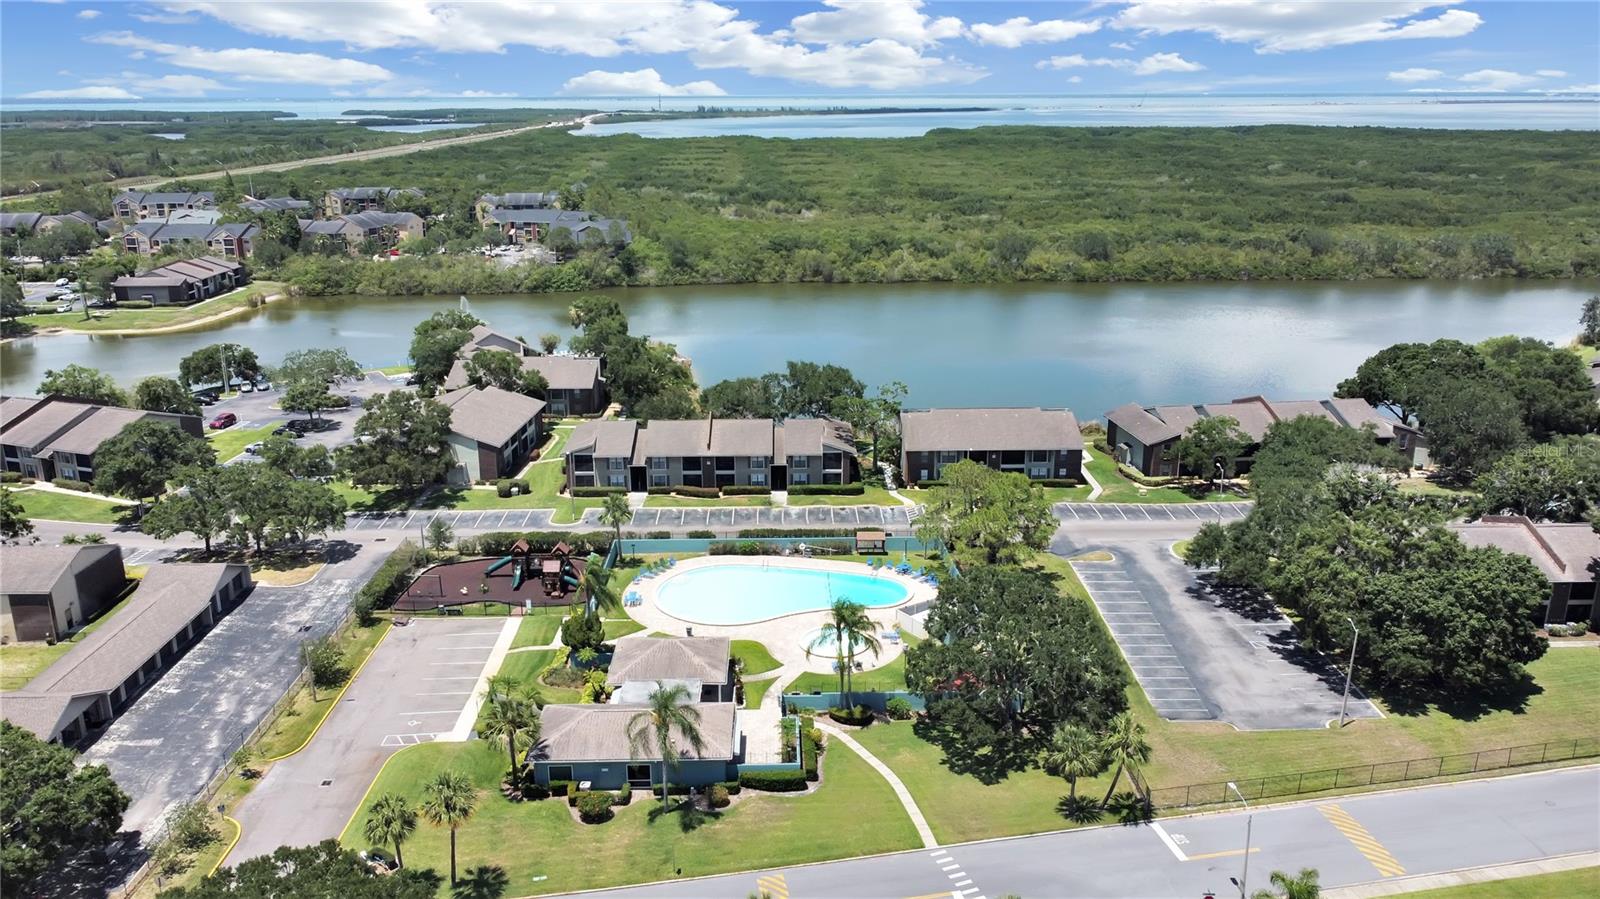 Amenities such as a clubhouse, on-site property management, huge resort-styled pool, tennis courts, soccer field, car wash station (with vacuum), a playground and plenty of guest parking.